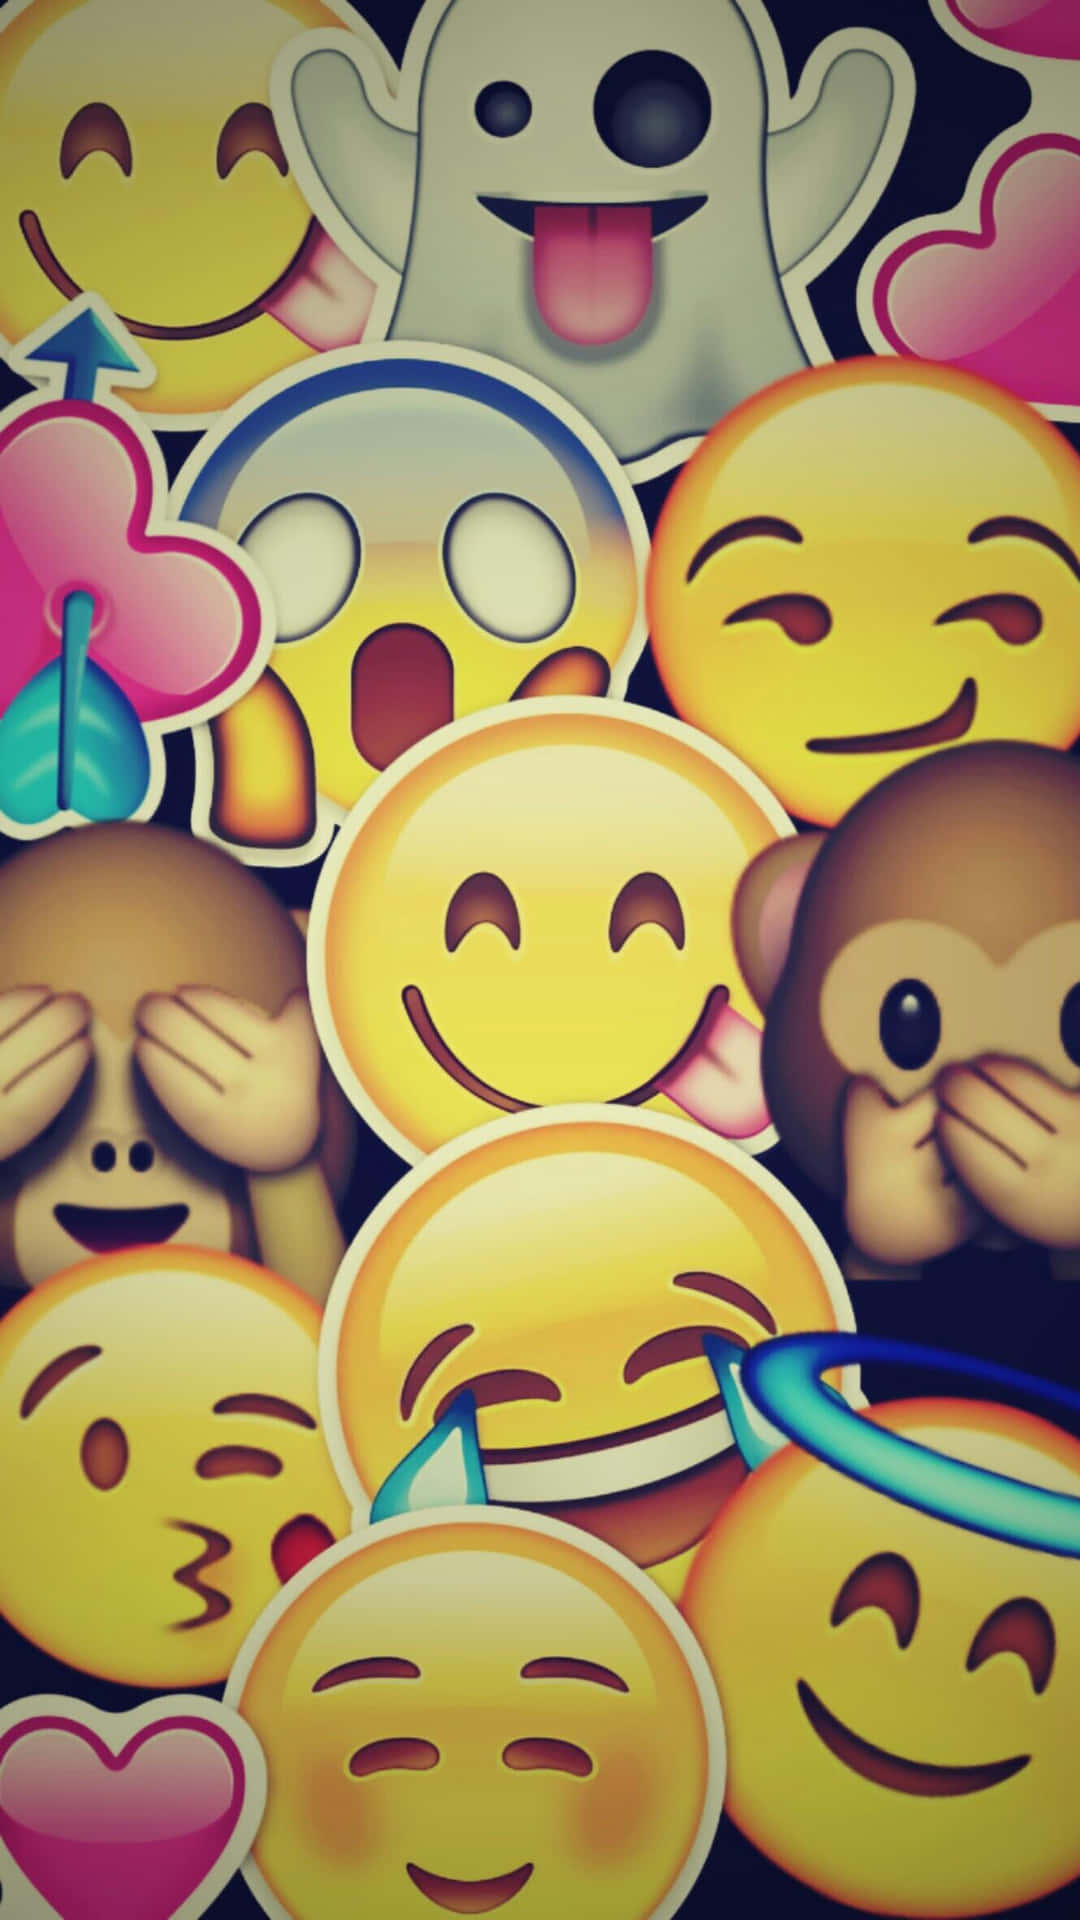 A happy and silly emoji that brightens up everyone's day. Wallpaper